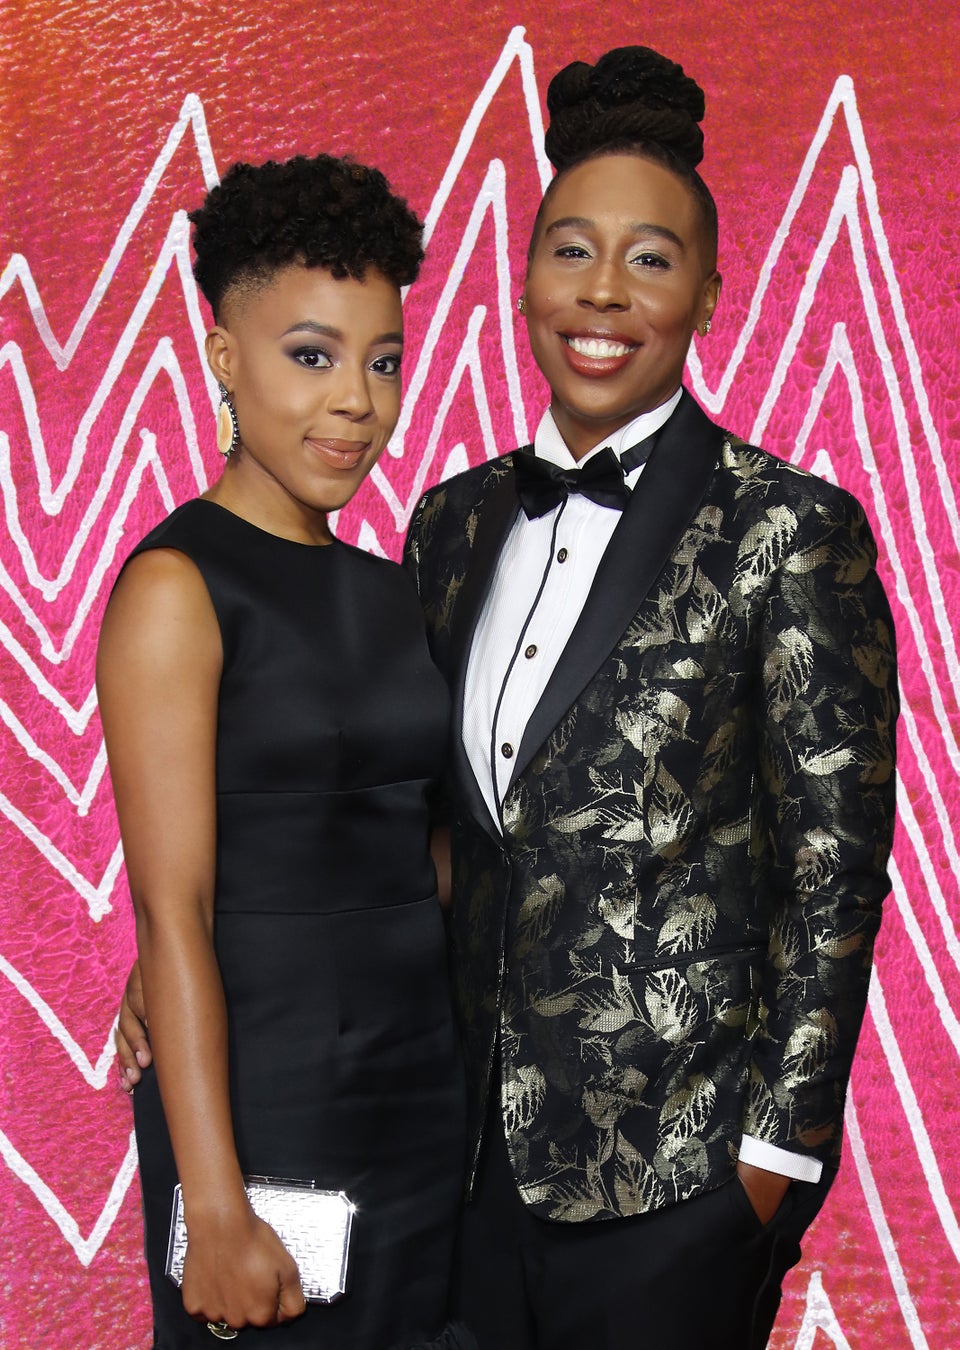 Lena Waithe Can’t Be With Her Girlfriend For Valentine’s Day So She Posted the Sweetest Message